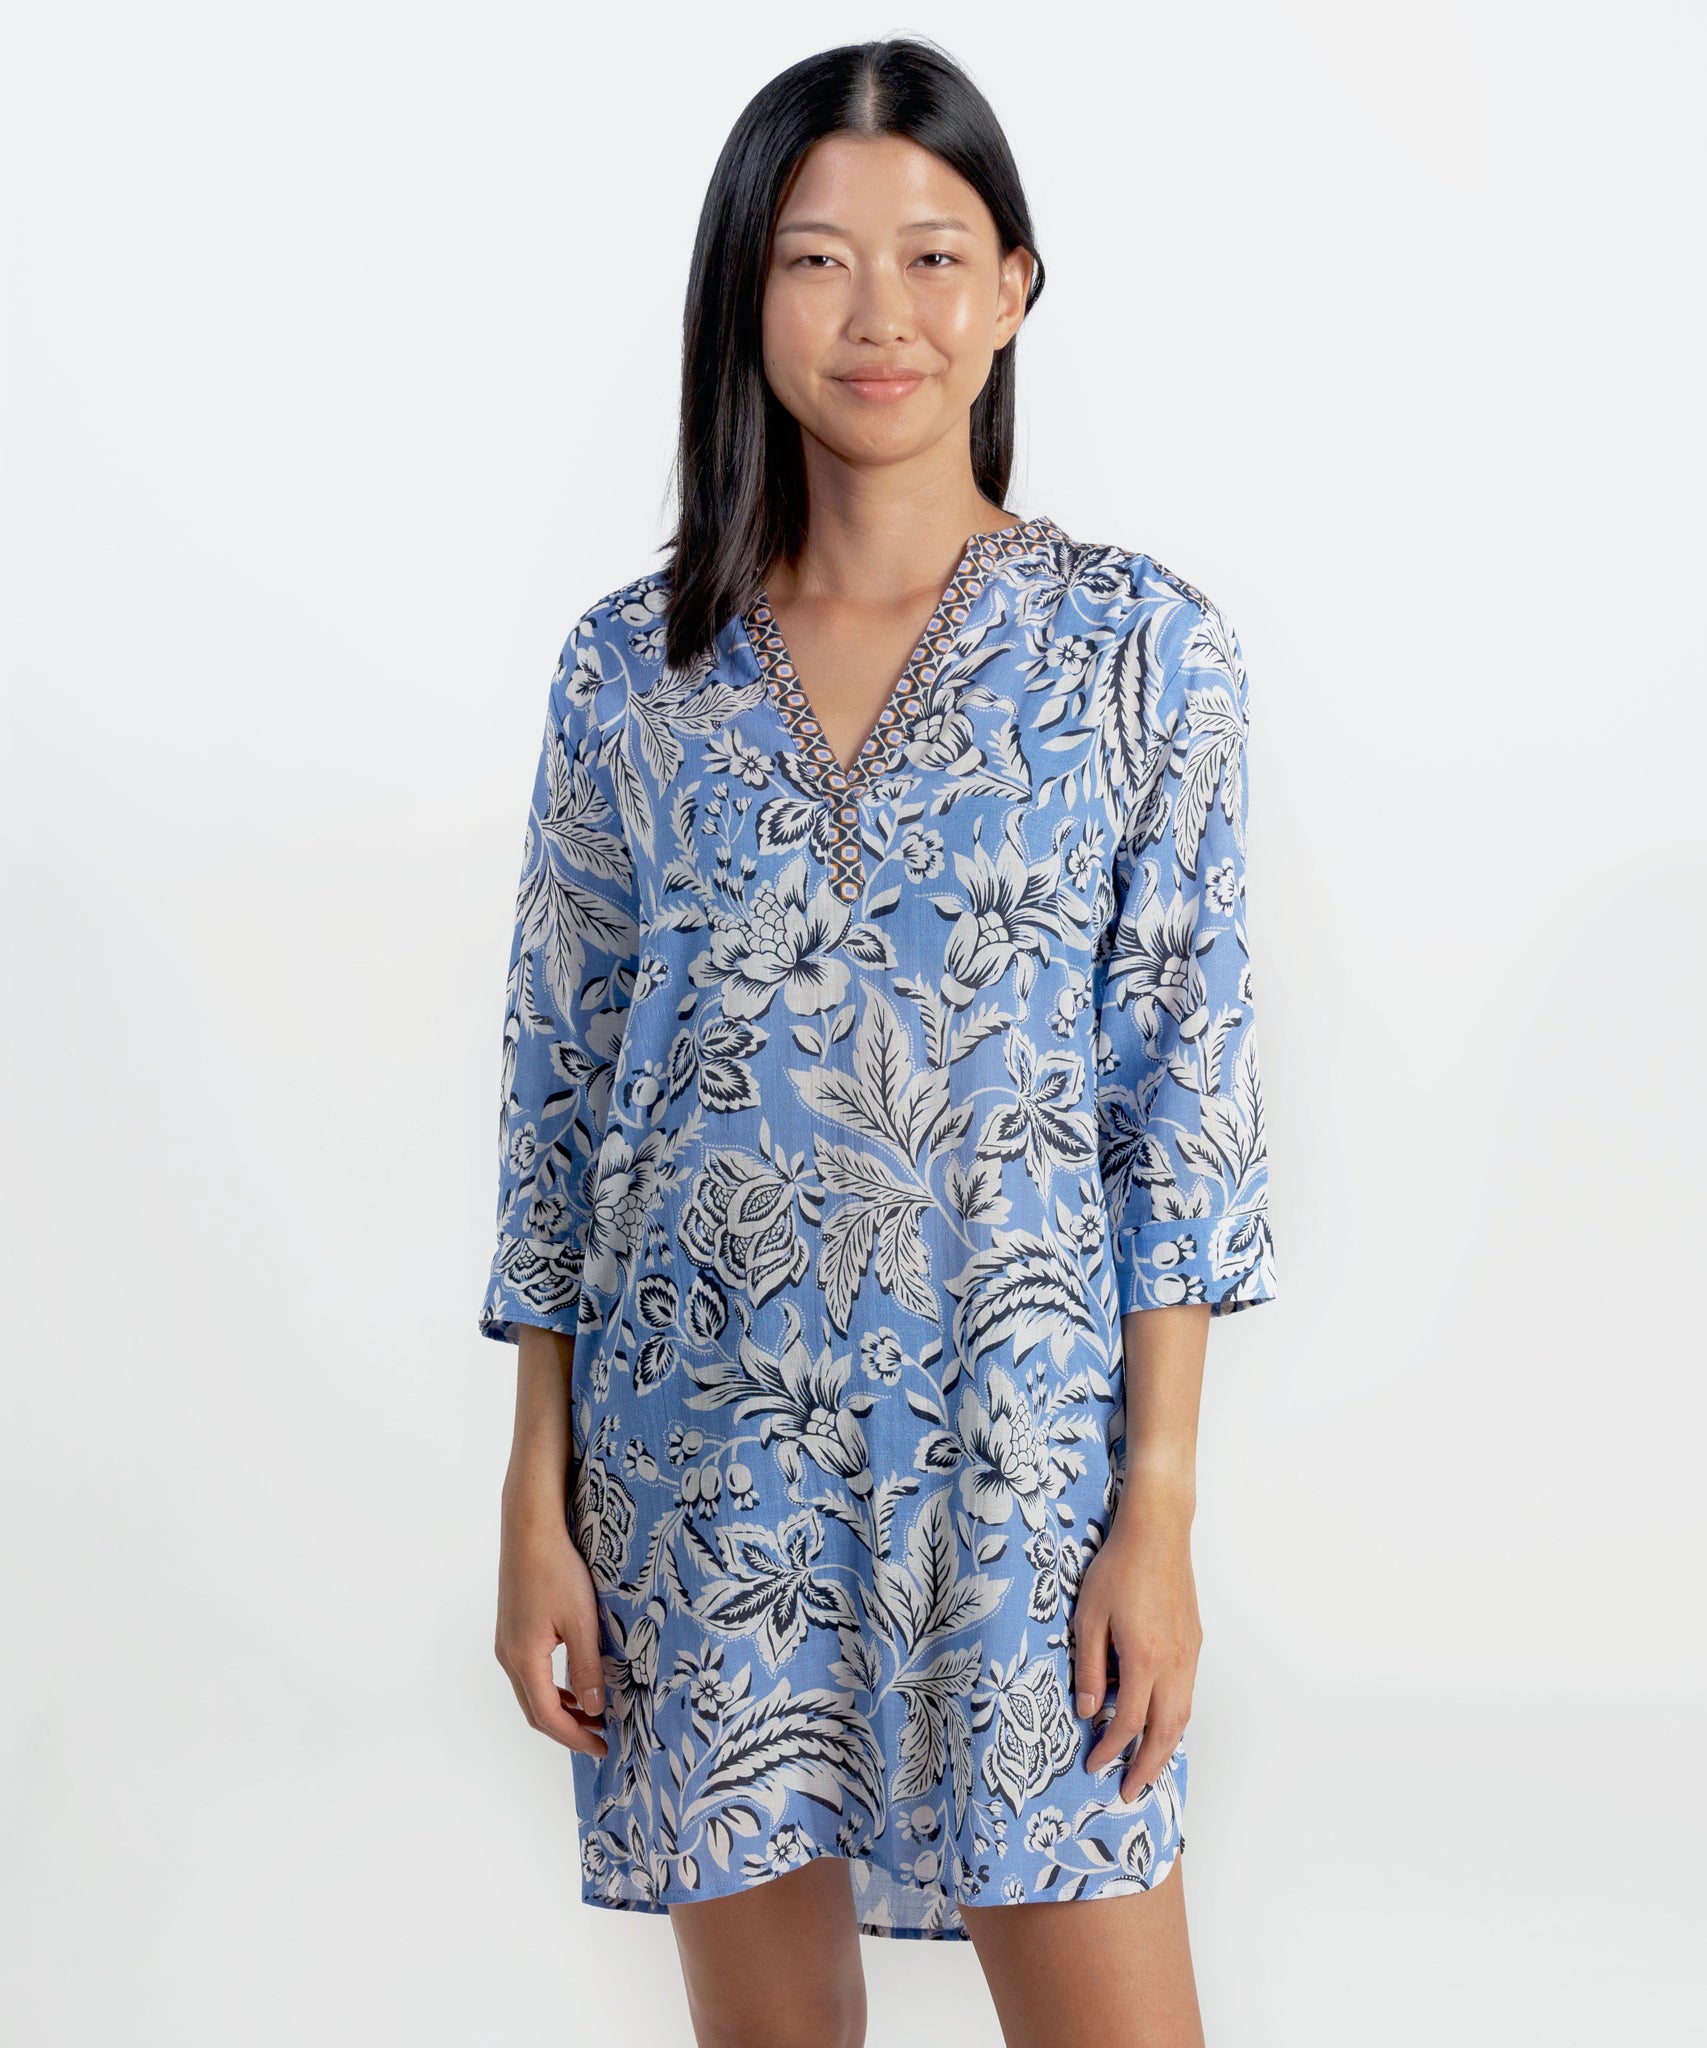 Delamere Tunic Dress in color Pale Iris on a model